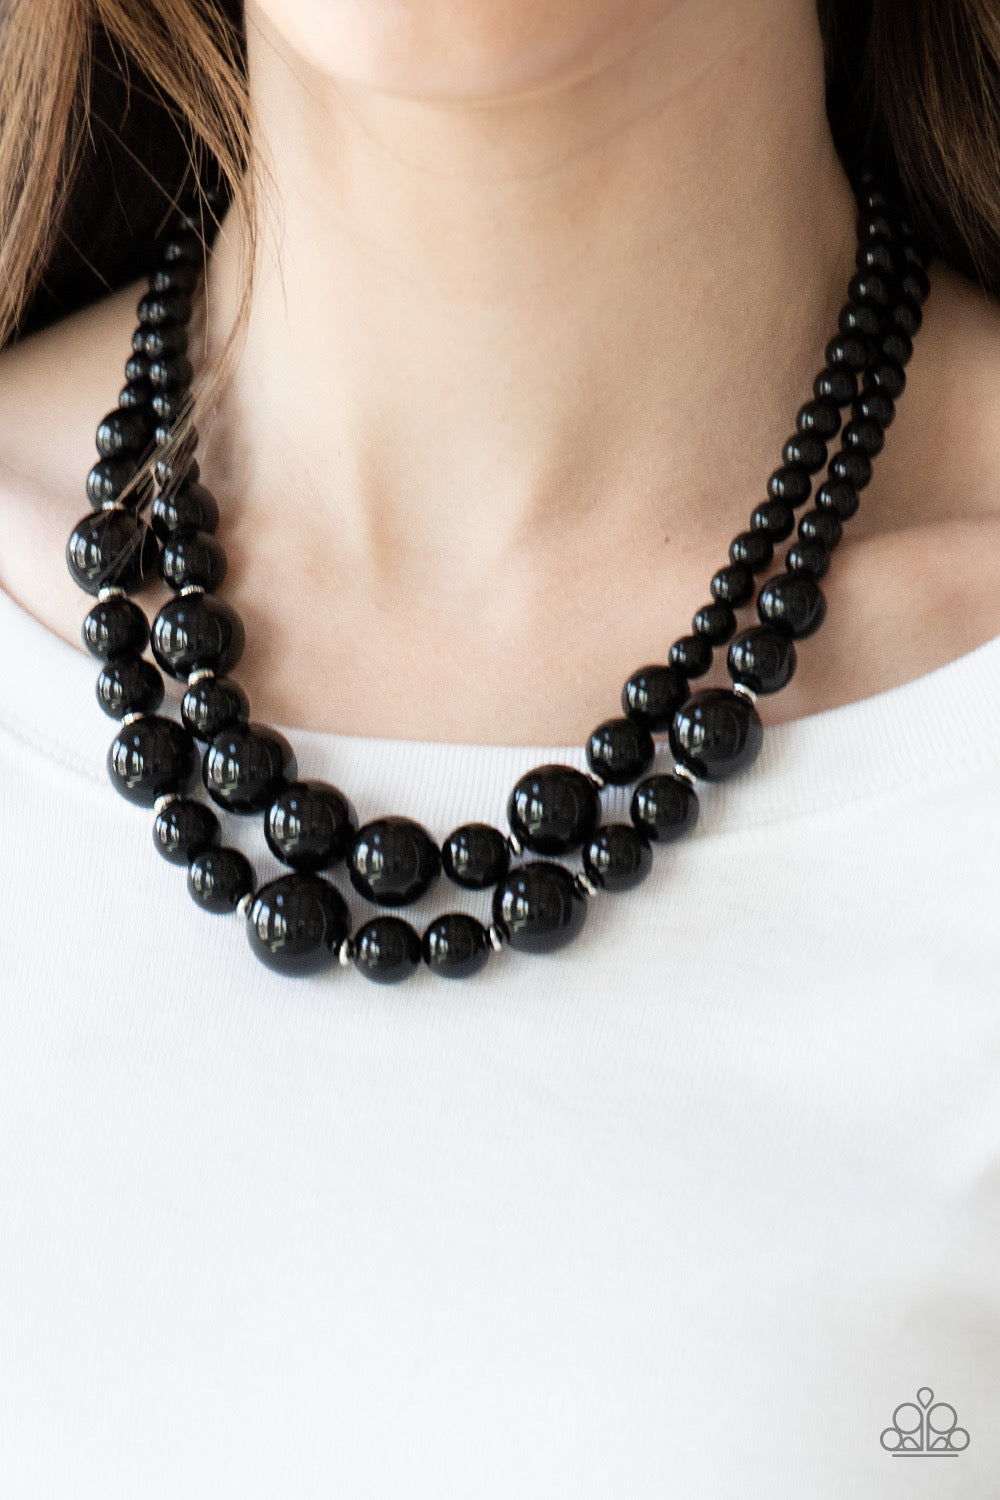 Paparazzi The More The Modest Necklace - Black